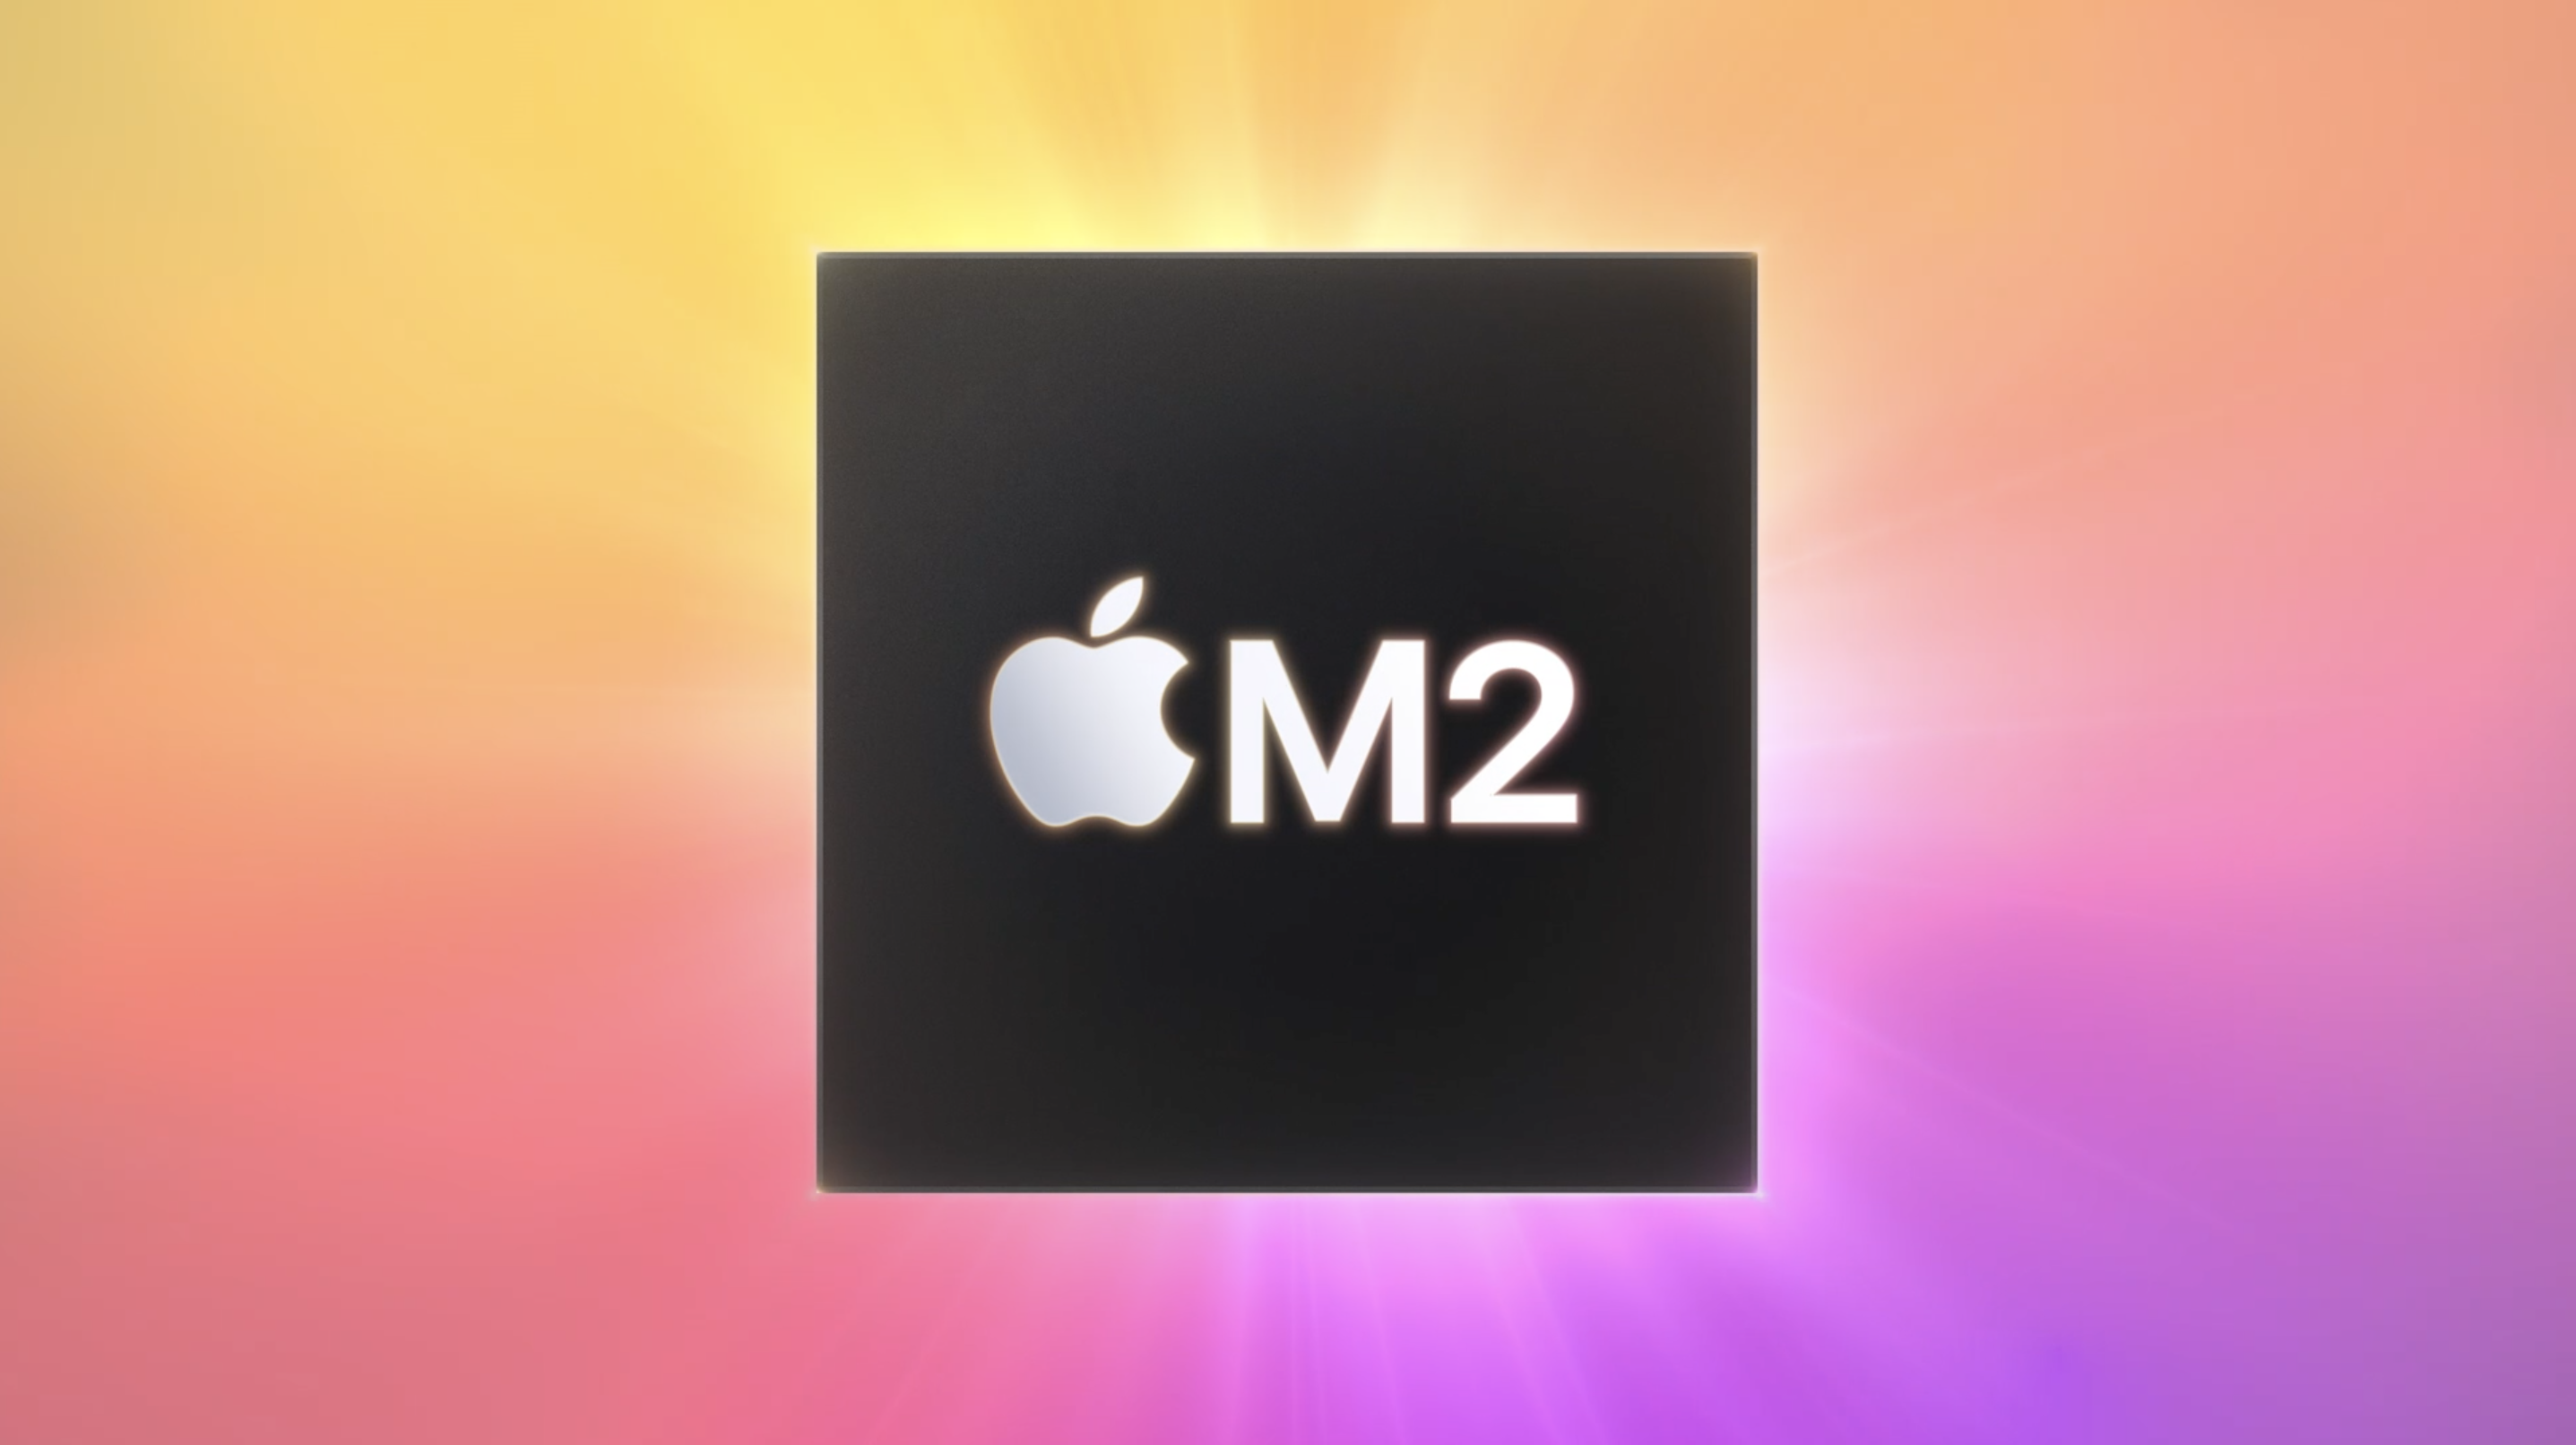 M2 at WWDC 2022